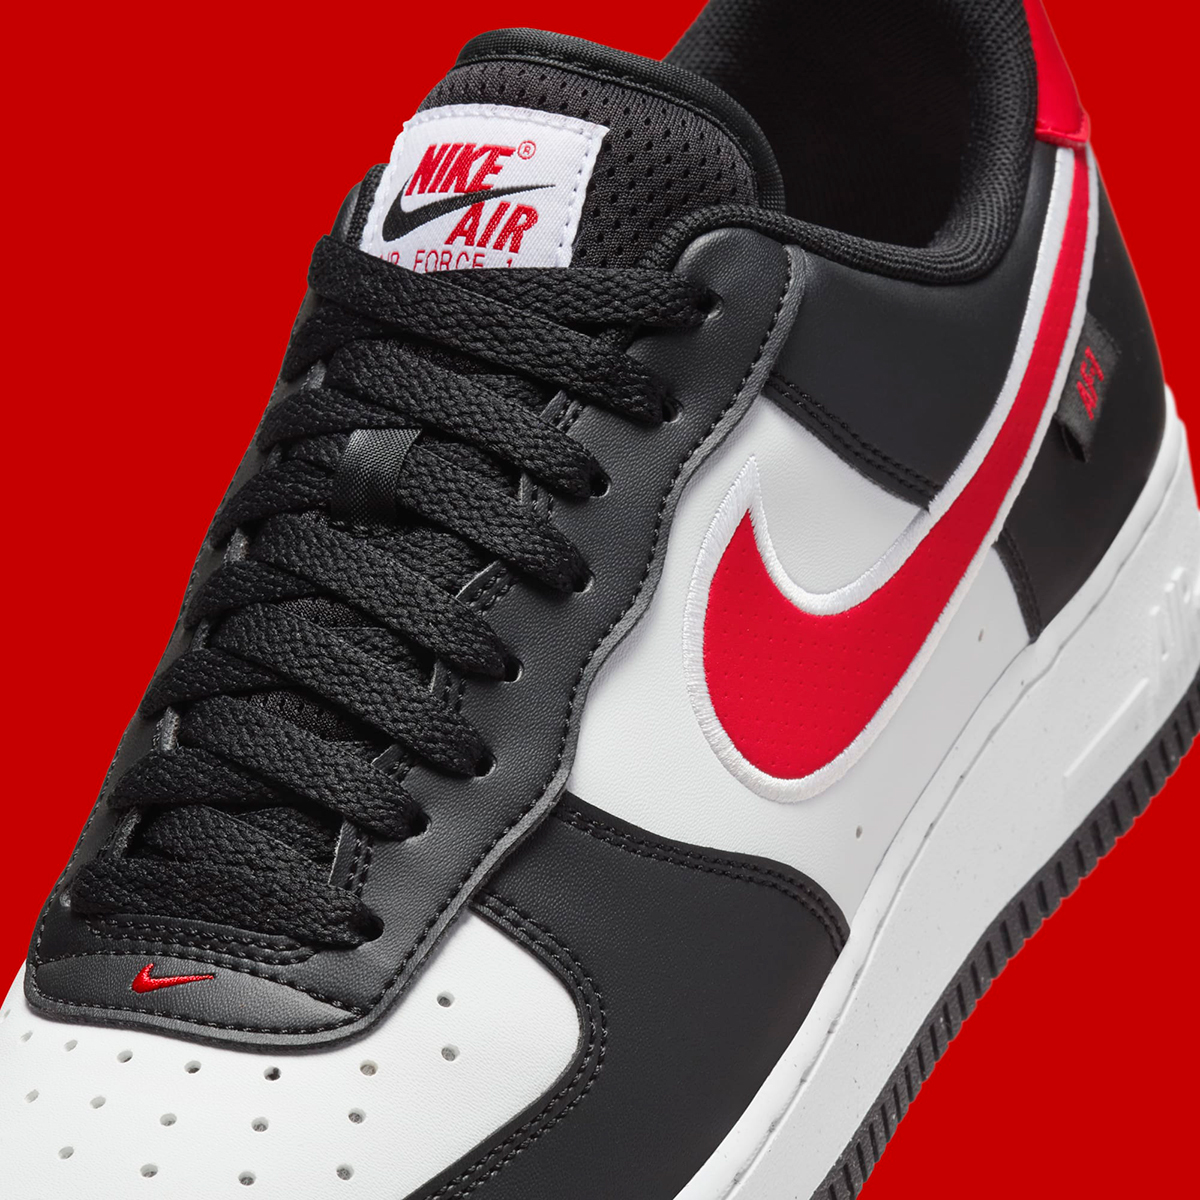 Nike Air Force 1 Low Black University Red White Hm0721 002 5